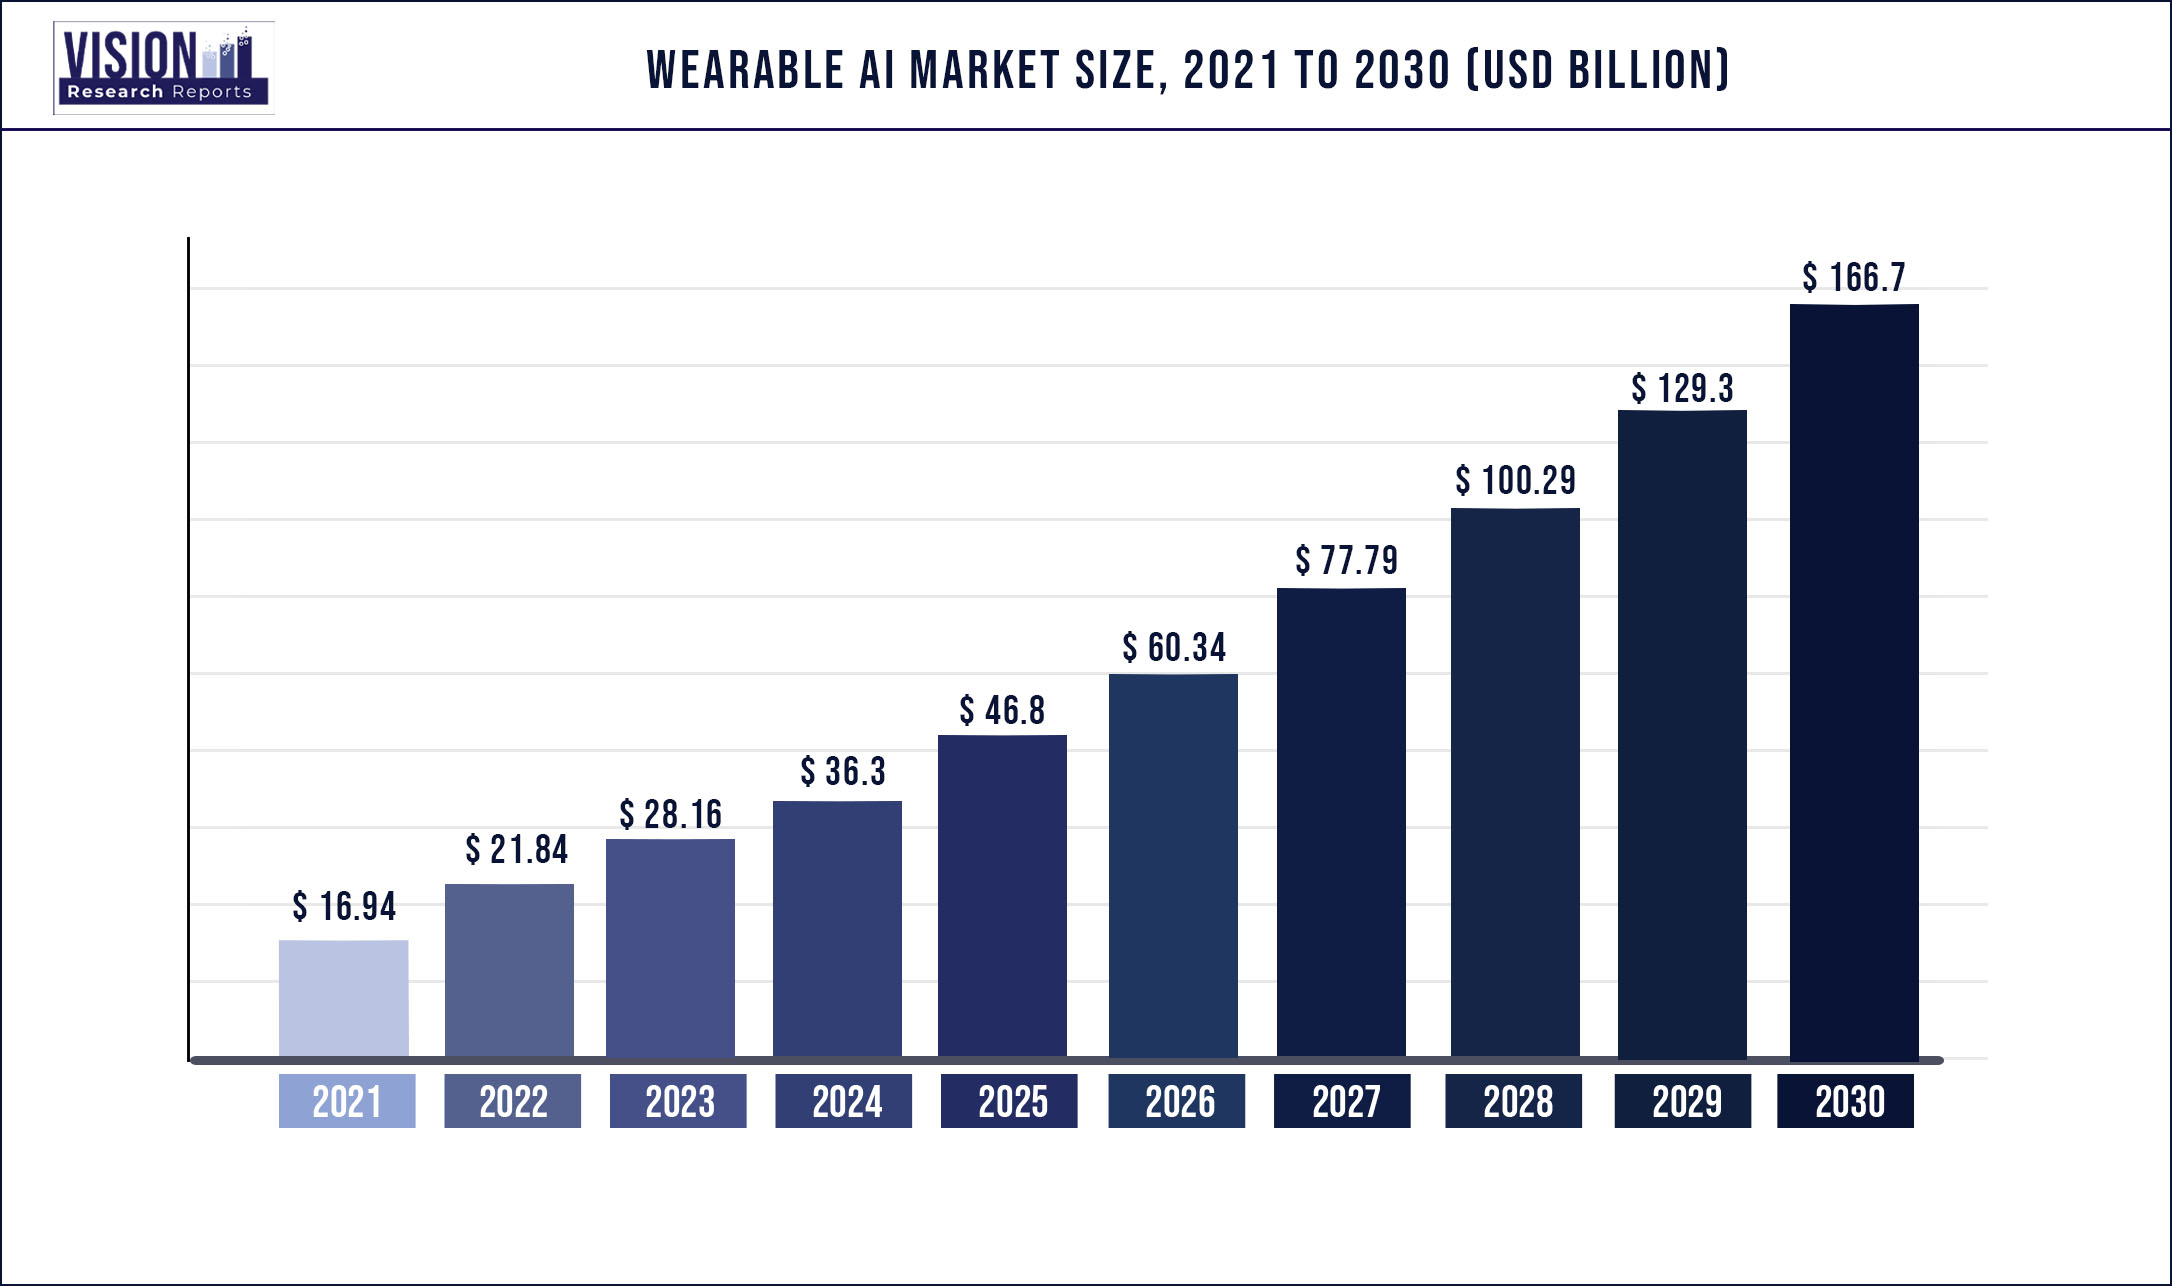 Wearable AI Market Size 2021 to 2030